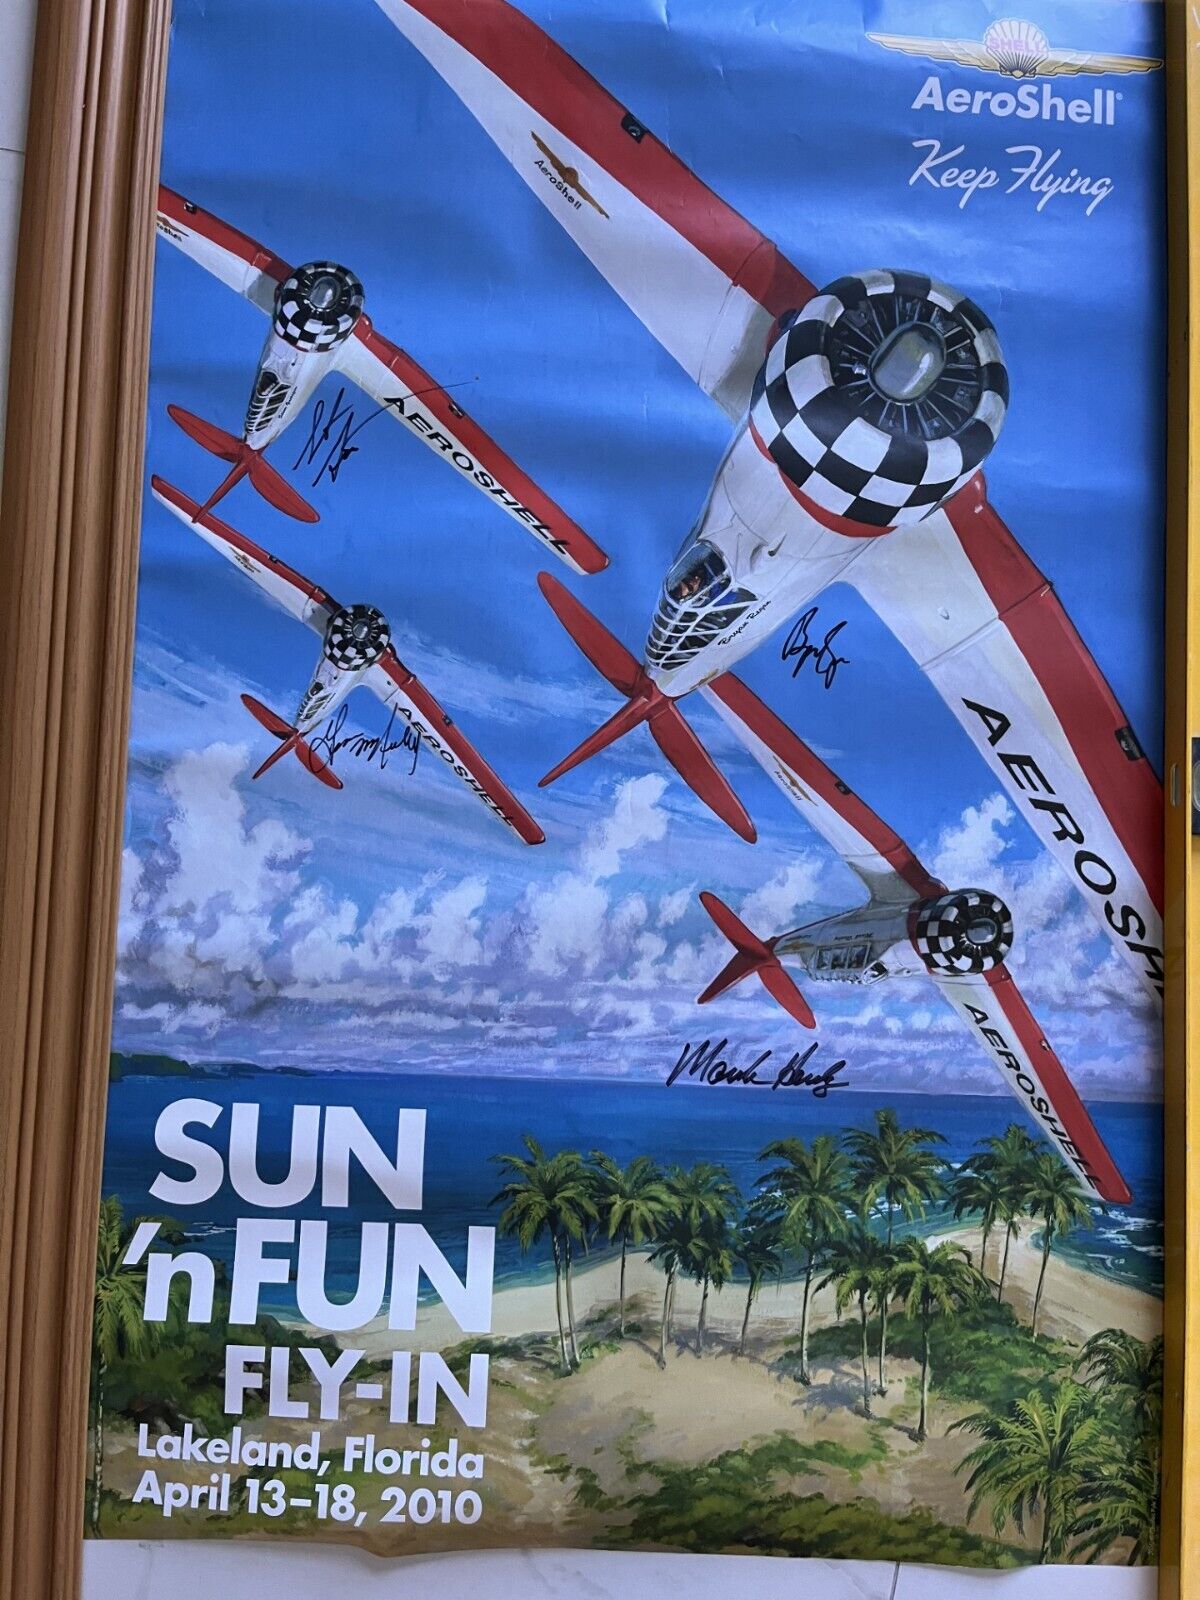 Sun'n Fun Fly-In 36 by 24 poster 4 pilots signed Lakeland Fl. April 13-18 2010